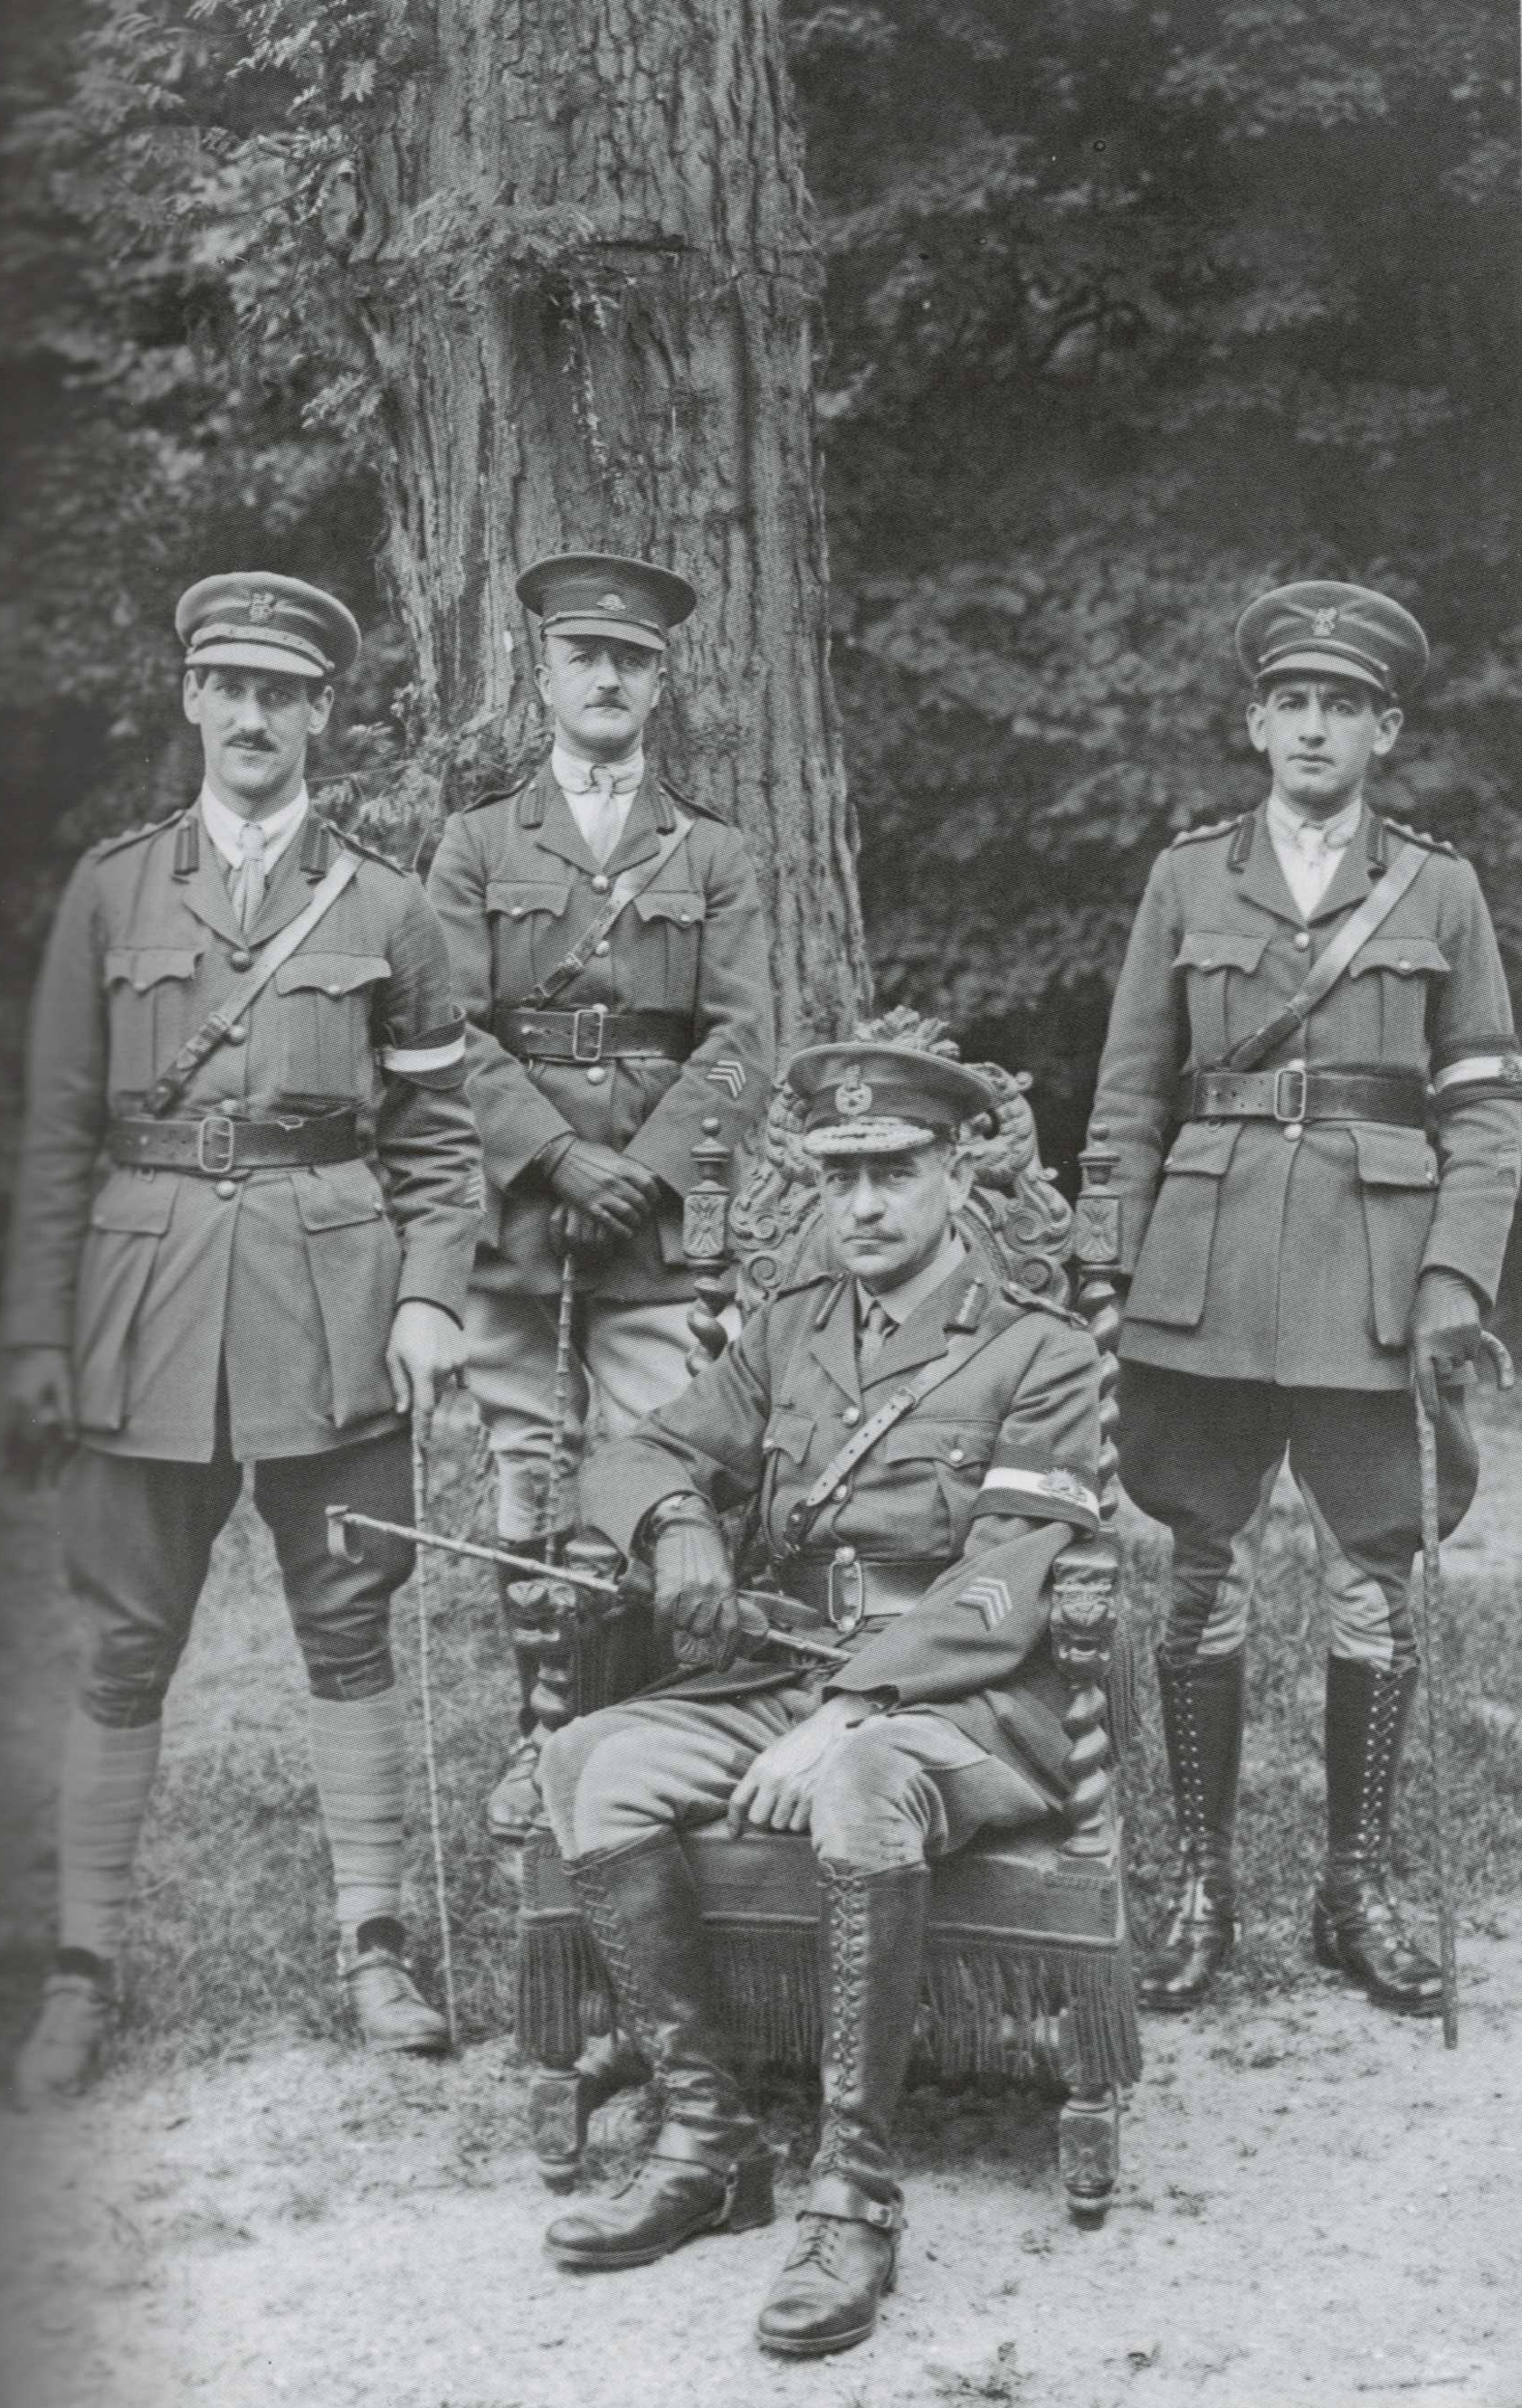 Lieutenant General Sir John Monash (seated) with his nephews and aides-de-camp Captain Aubrey Moss (left) and Captain Paul Simsonson (right), and Major Walter Berry (centre) of the Australian Corps Headquarters and Chateau Bertangles in the Somme, 20 July 1918